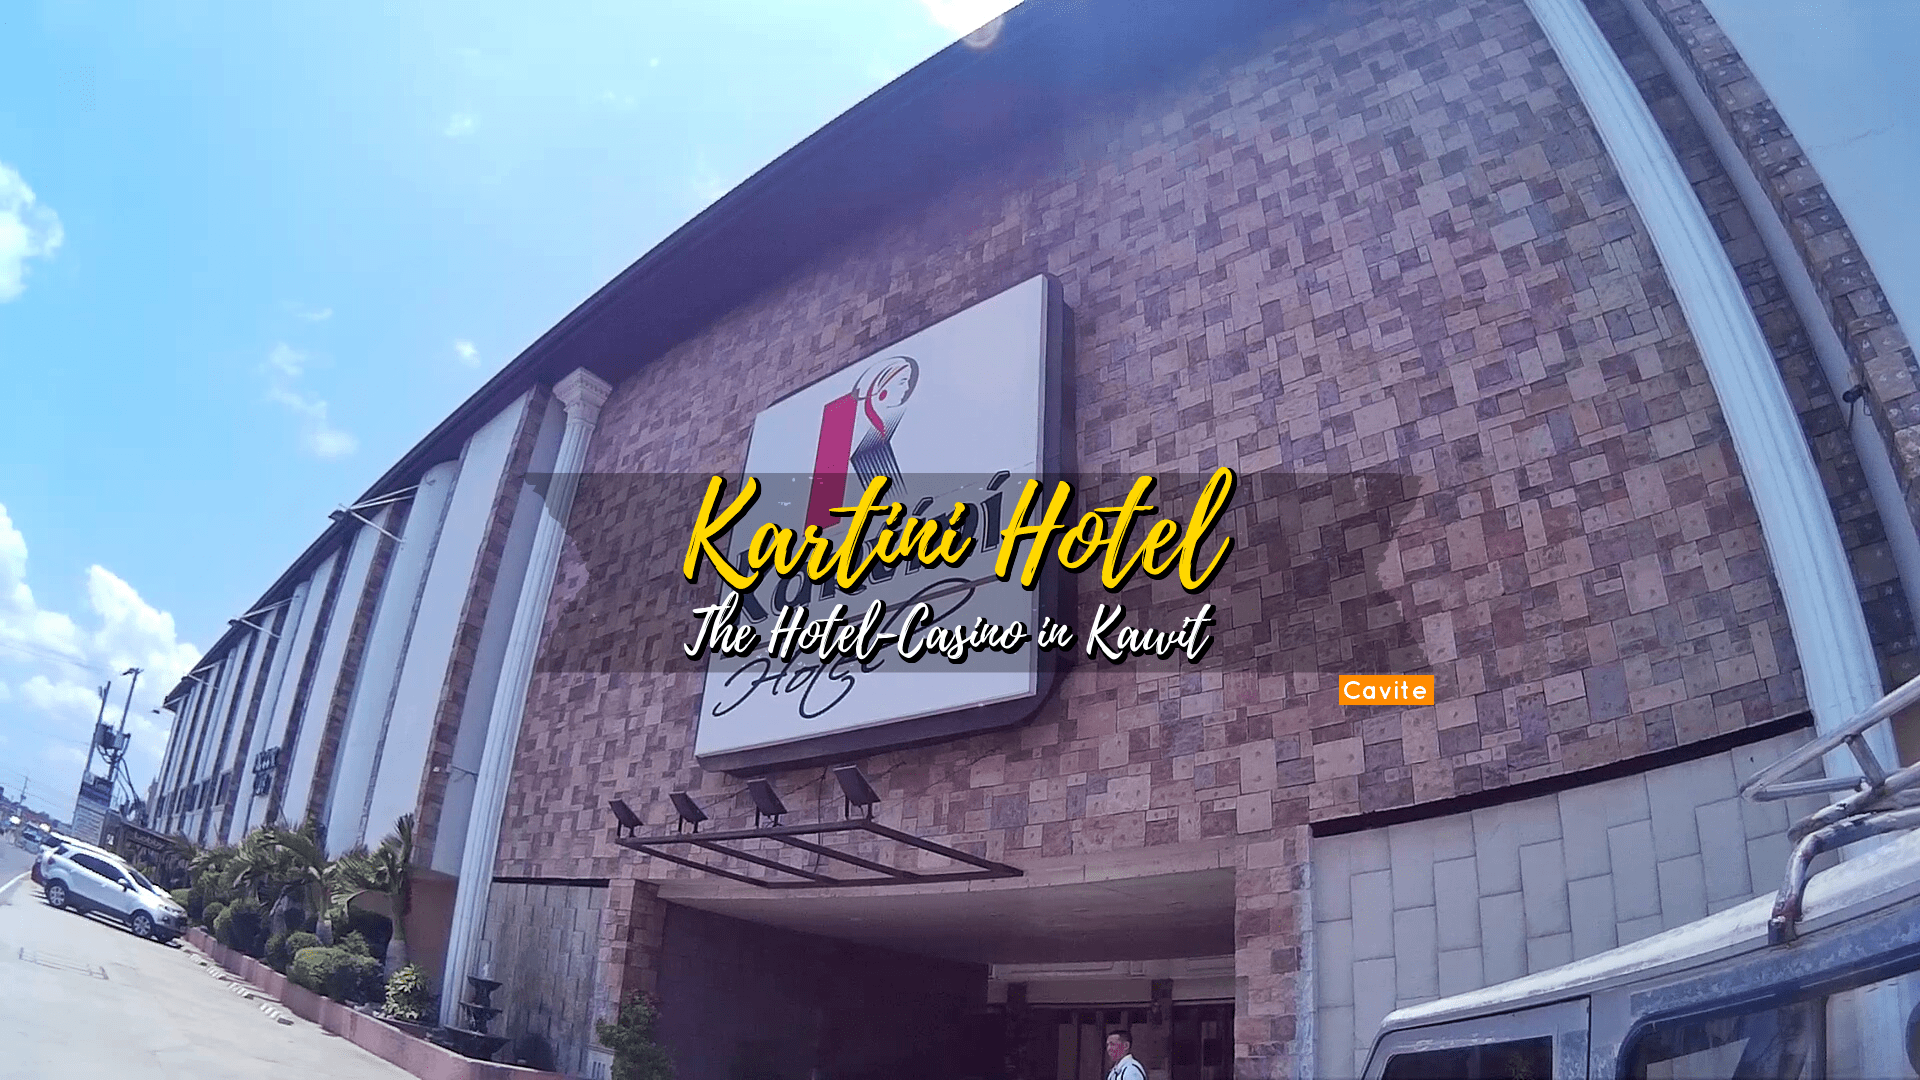 Kartini Hotel Review: The Hotel-Casino in Kawit